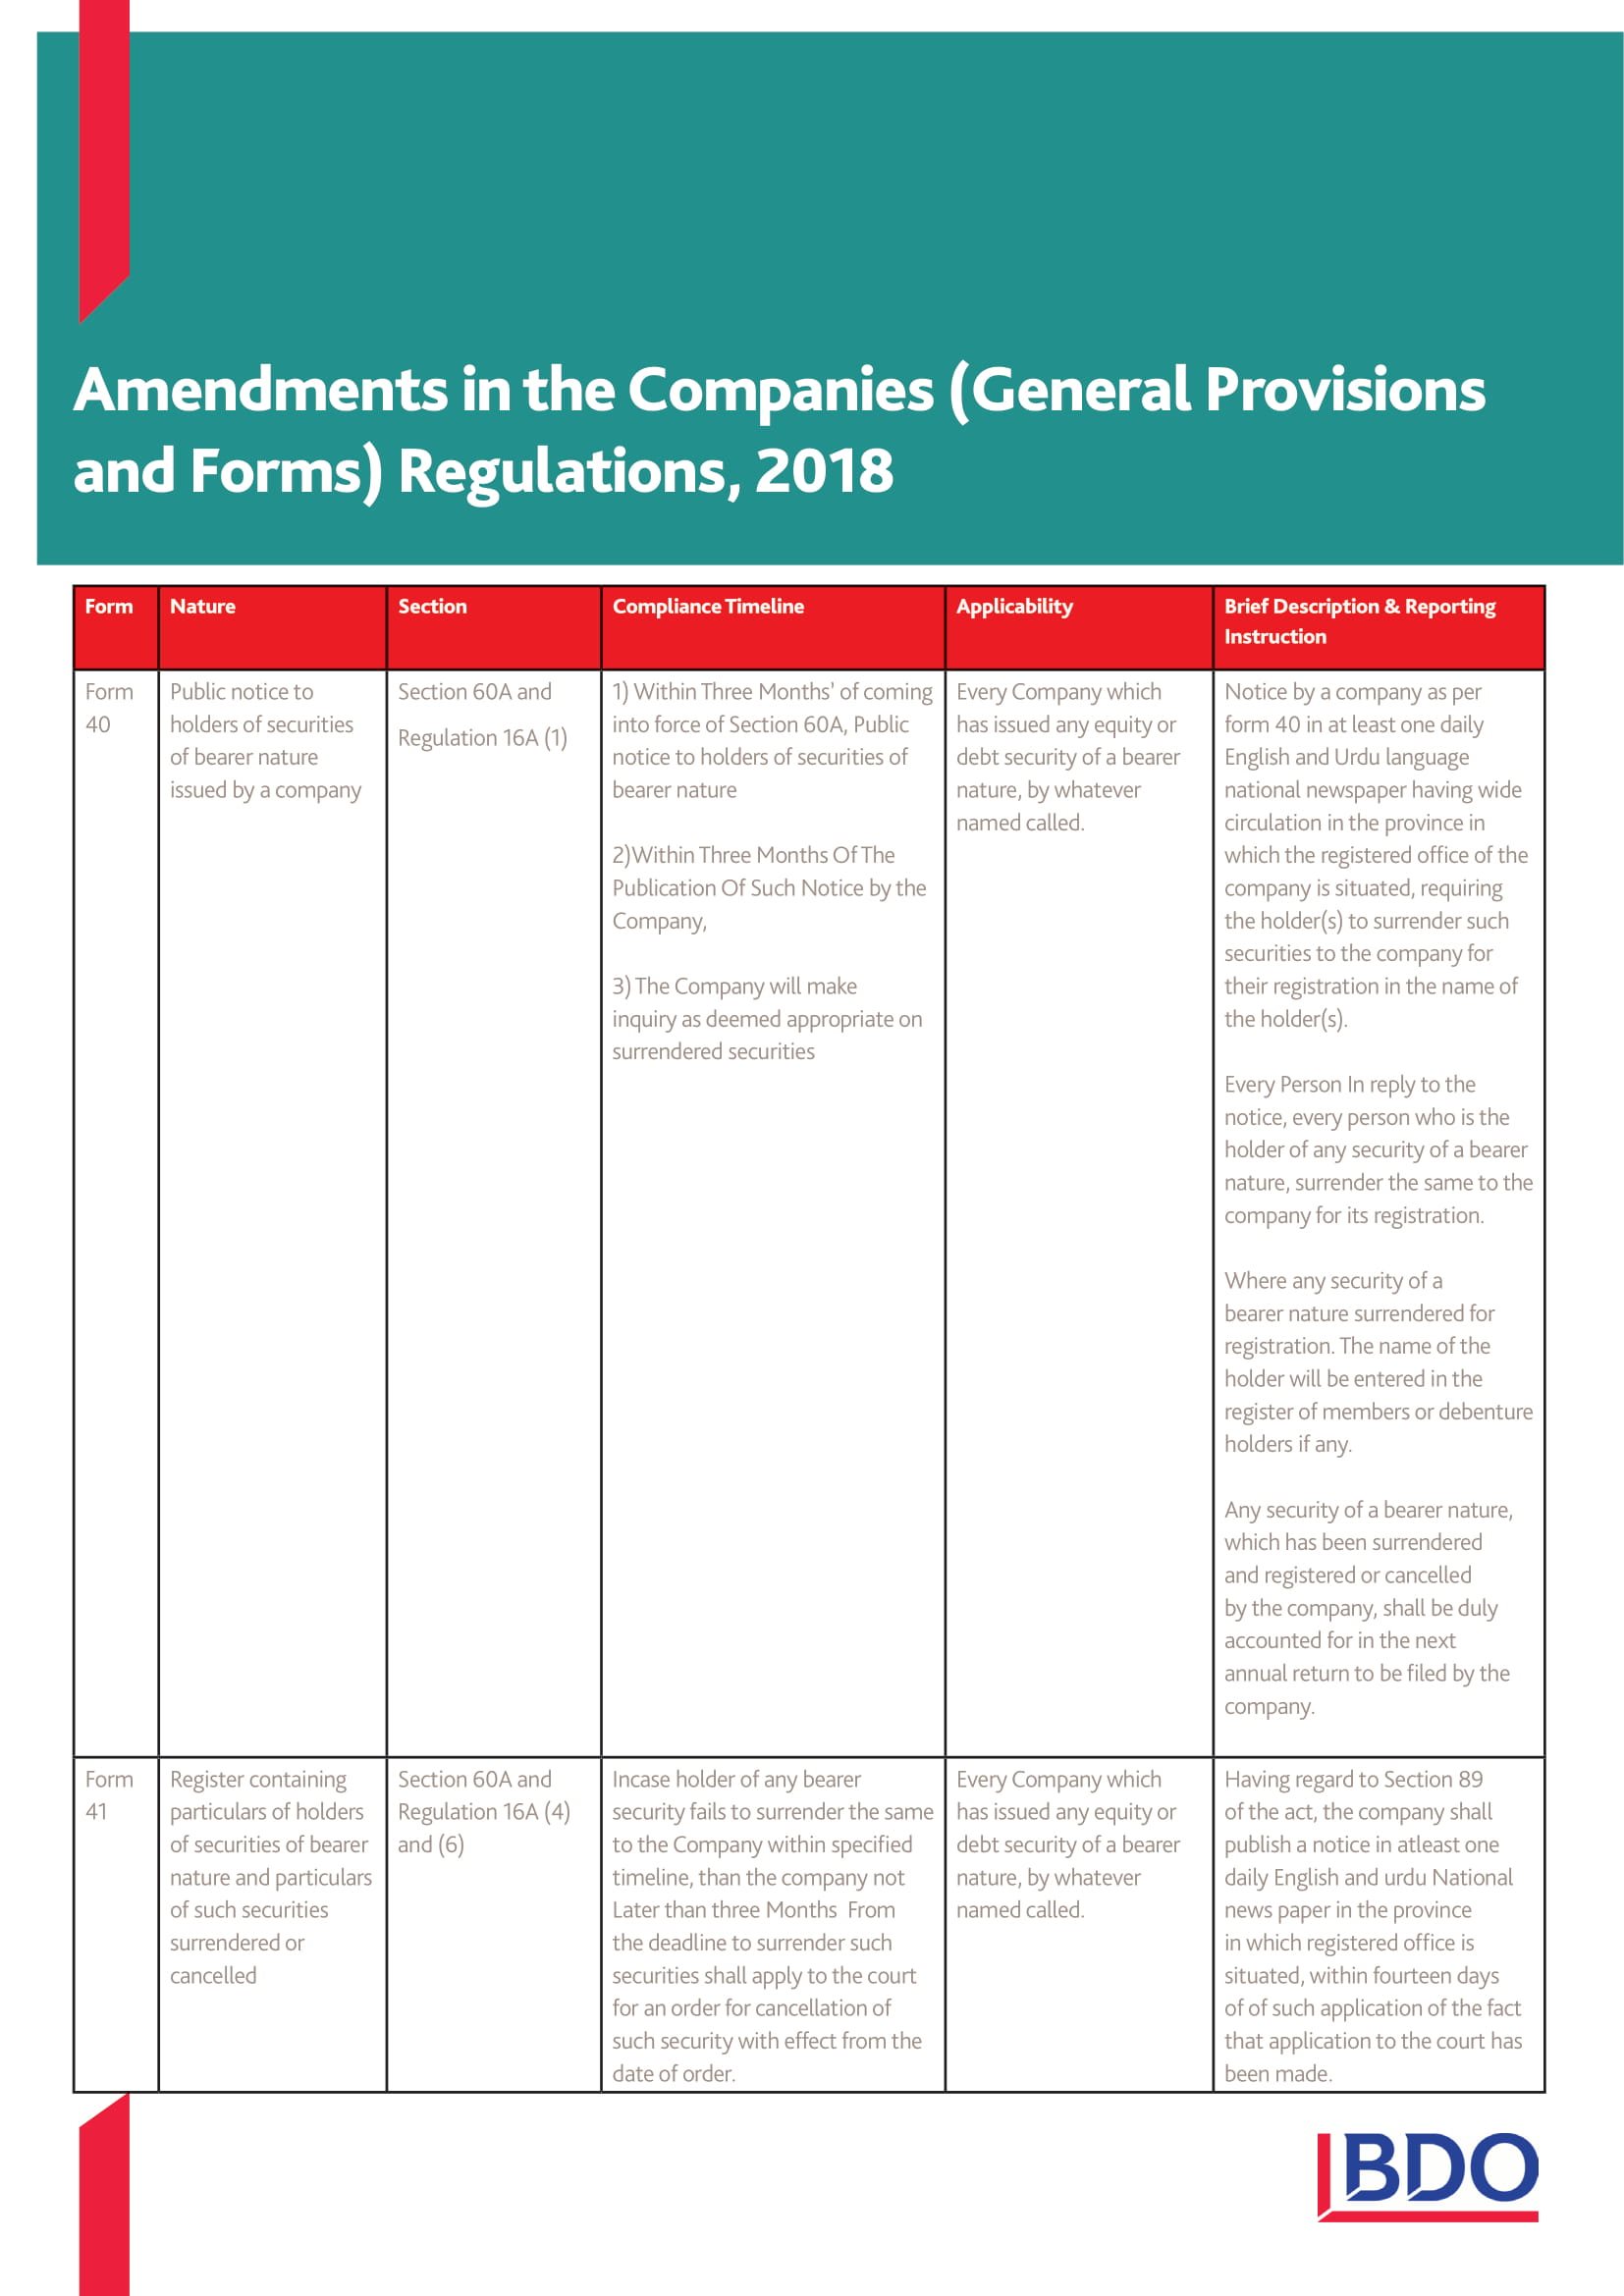 Amendments in the Companies (General Provisions and Forms) Regulations, 2018 